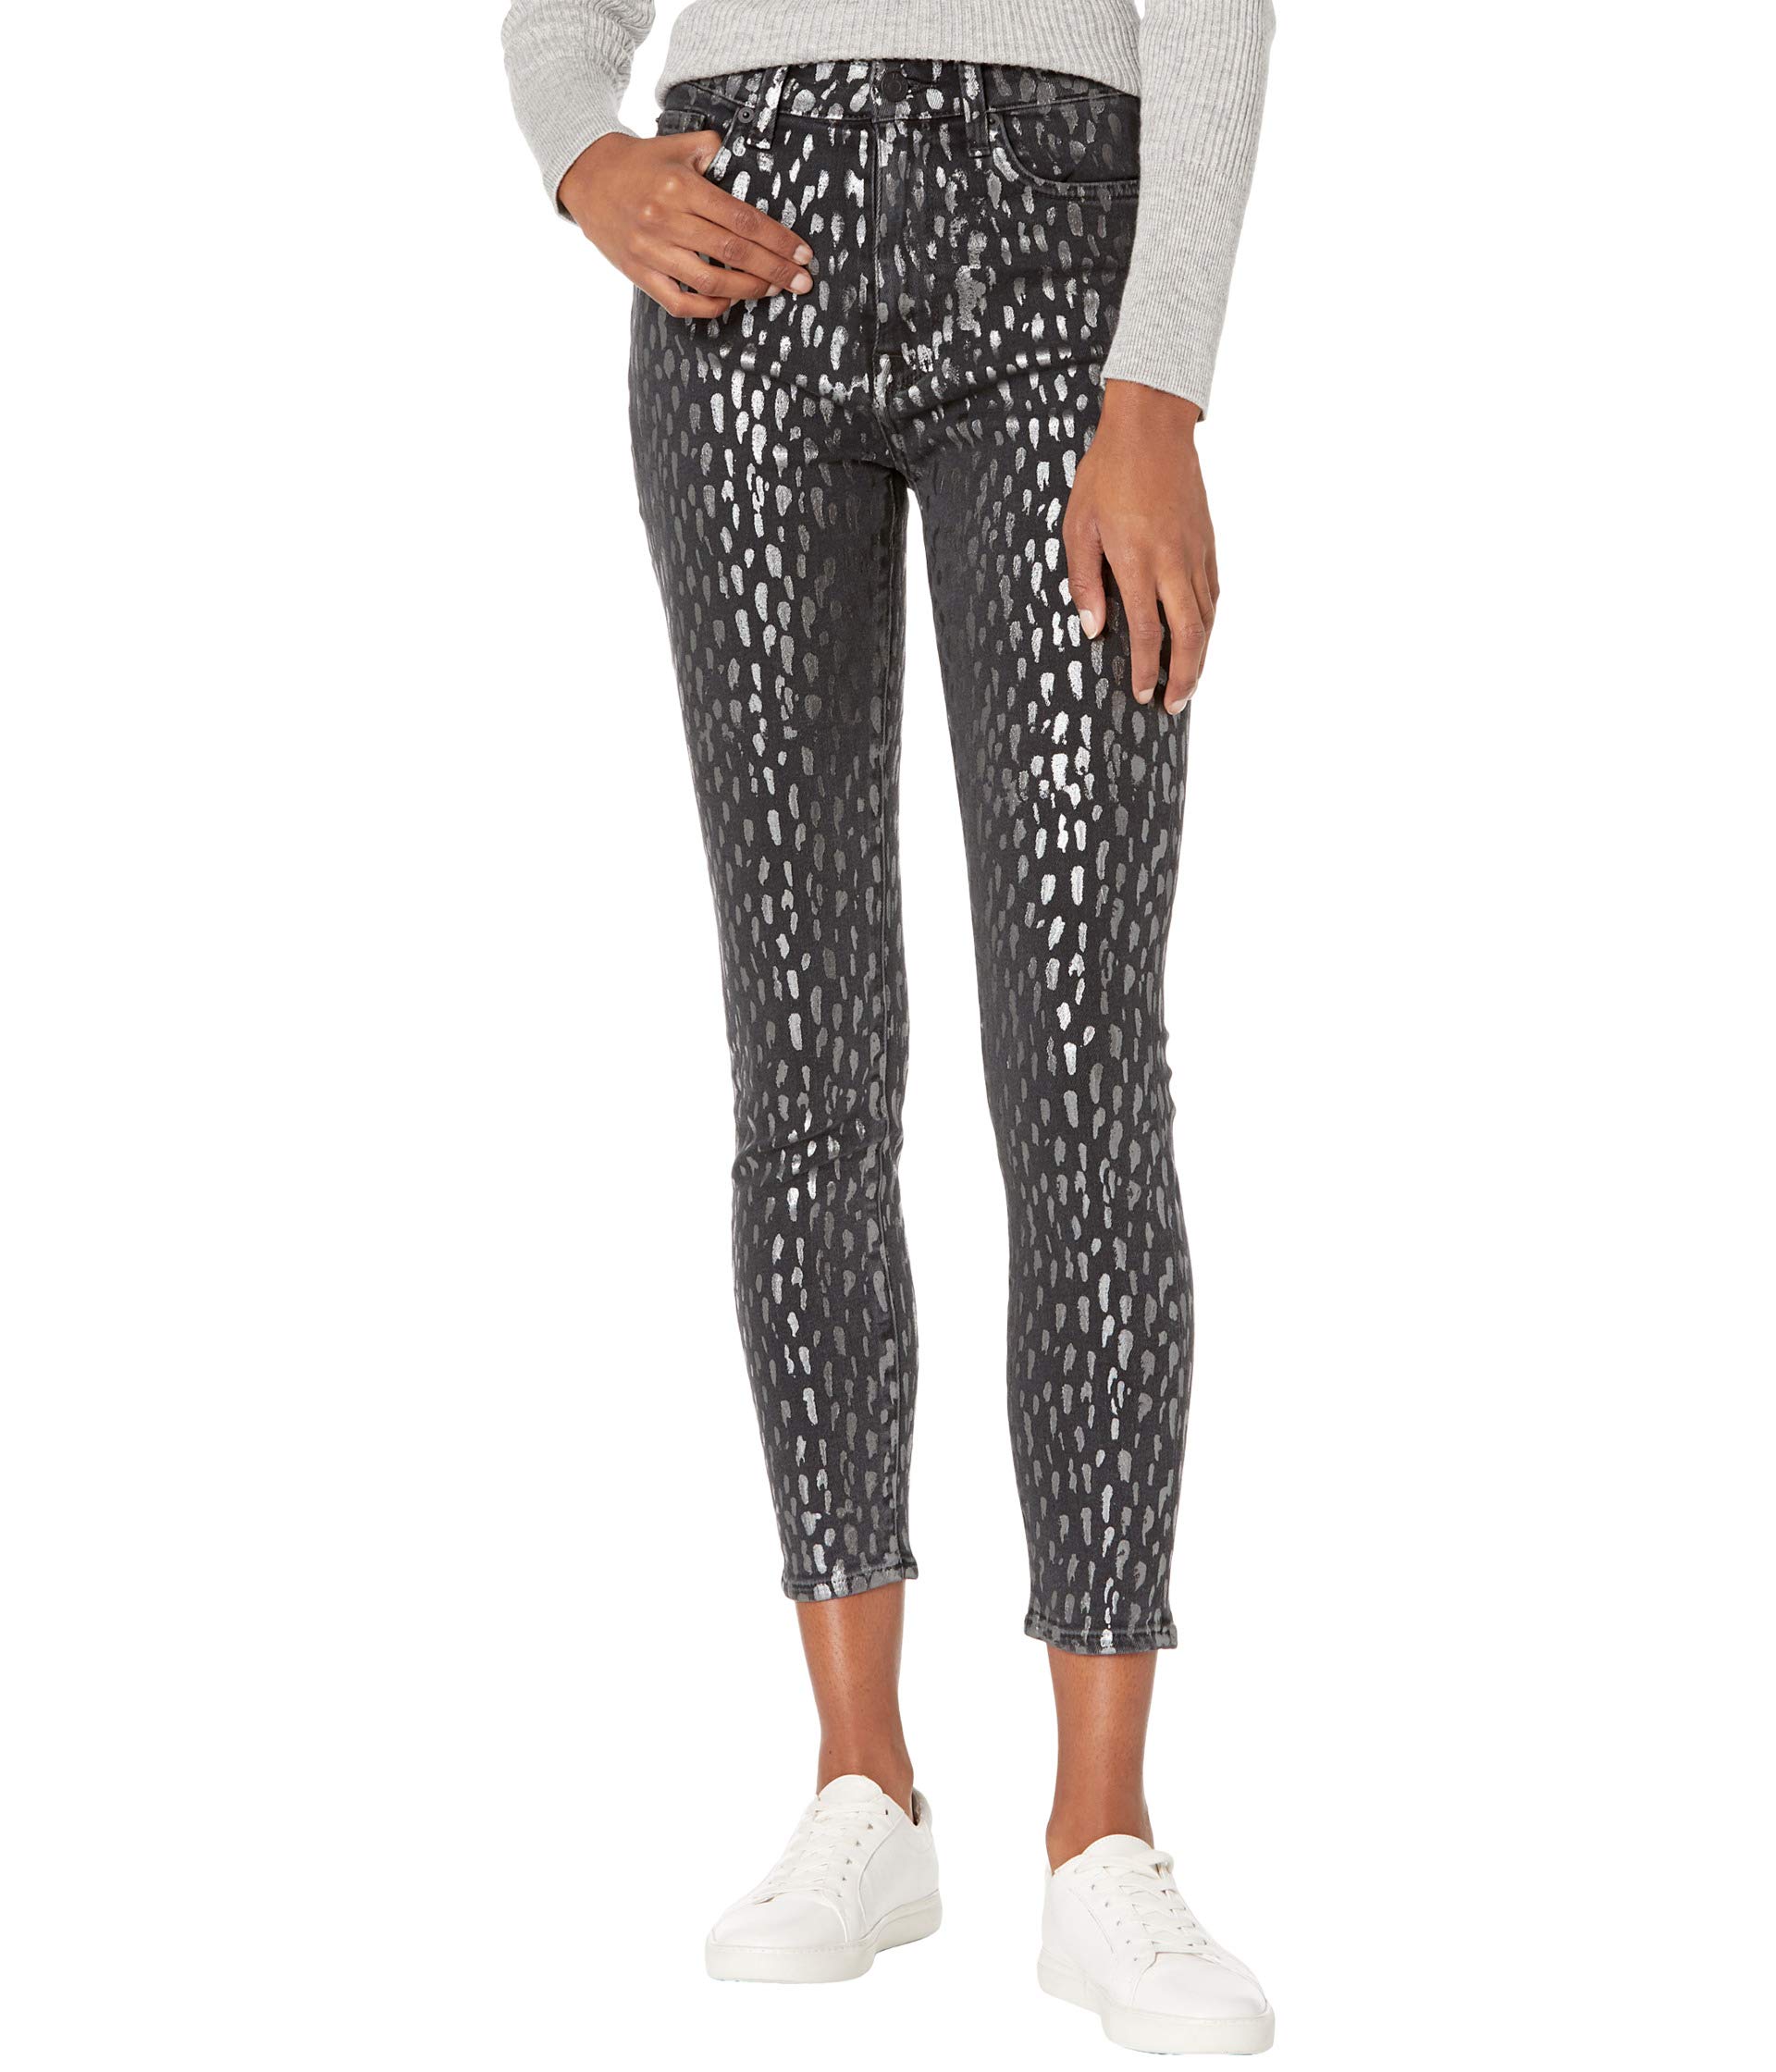 Джинсы 7 For All Mankind, The High-Waist Skinny in Foil Snow Leopard